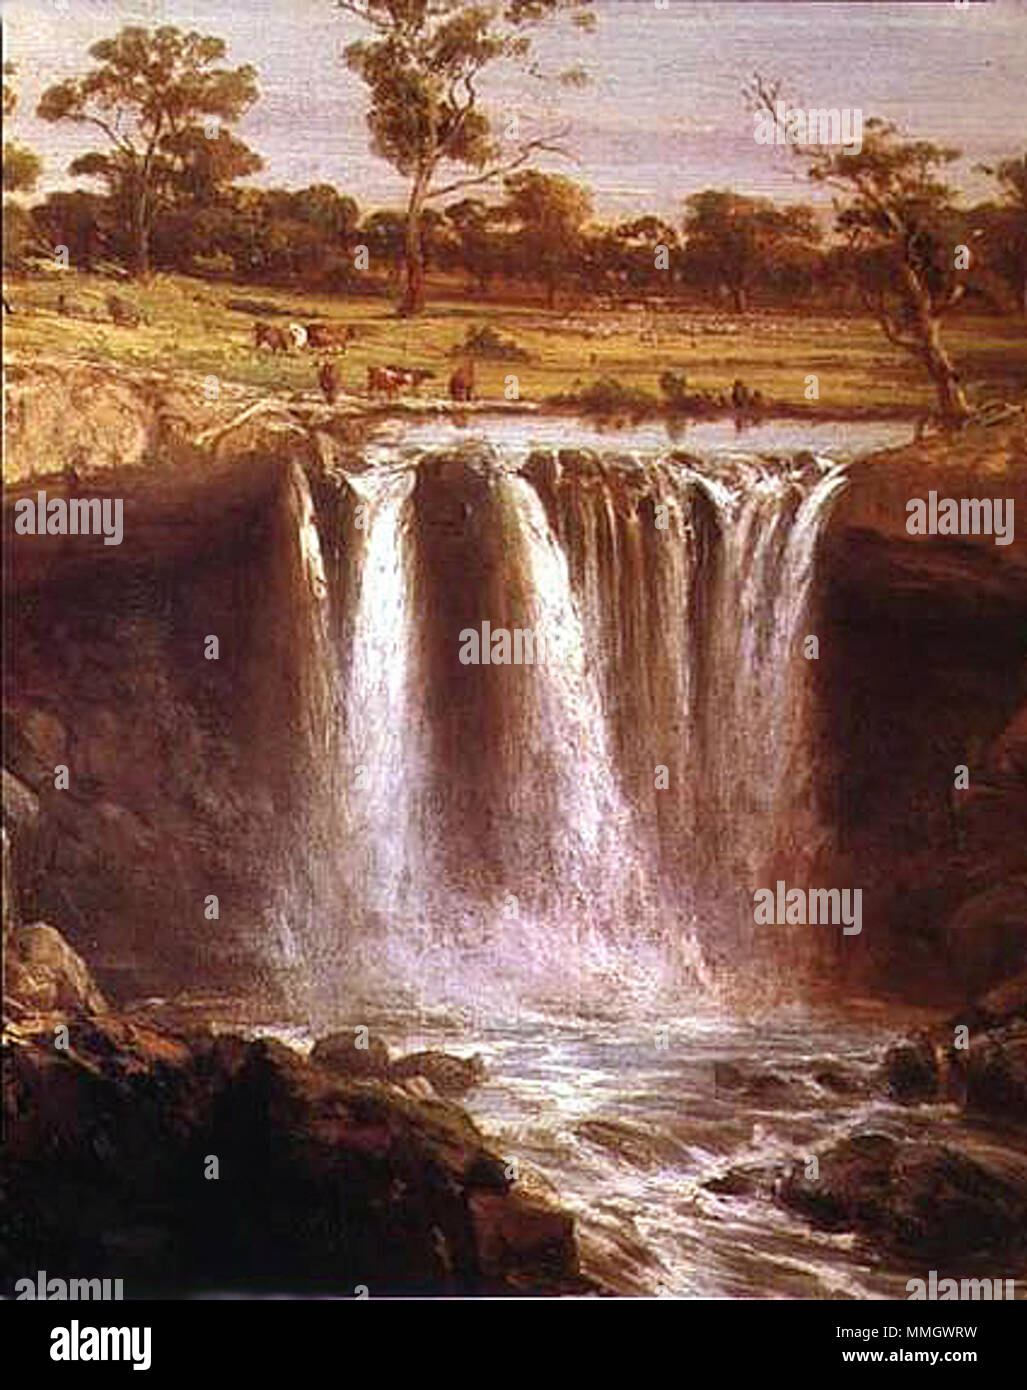 Falls on the Wannon, Australia. Unknown date.   Louis Buvelot  (1814–1888)     Alternative names Abram Louis Buvelot; Louis Buvelot  Description Swiss-Australian painter, engraver and photographer  Date of birth/death 3 March 1814 30 May 1888  Location of birth/death Morges Melbourne  Work location Switzerland: Bern, Lausanne; France: Paris; Brazil: Salvador, Rio de Janeiro; Australia: Melbourne Abraham Louis Buvelot - Falls on the Wannon, Australia Stock Photo